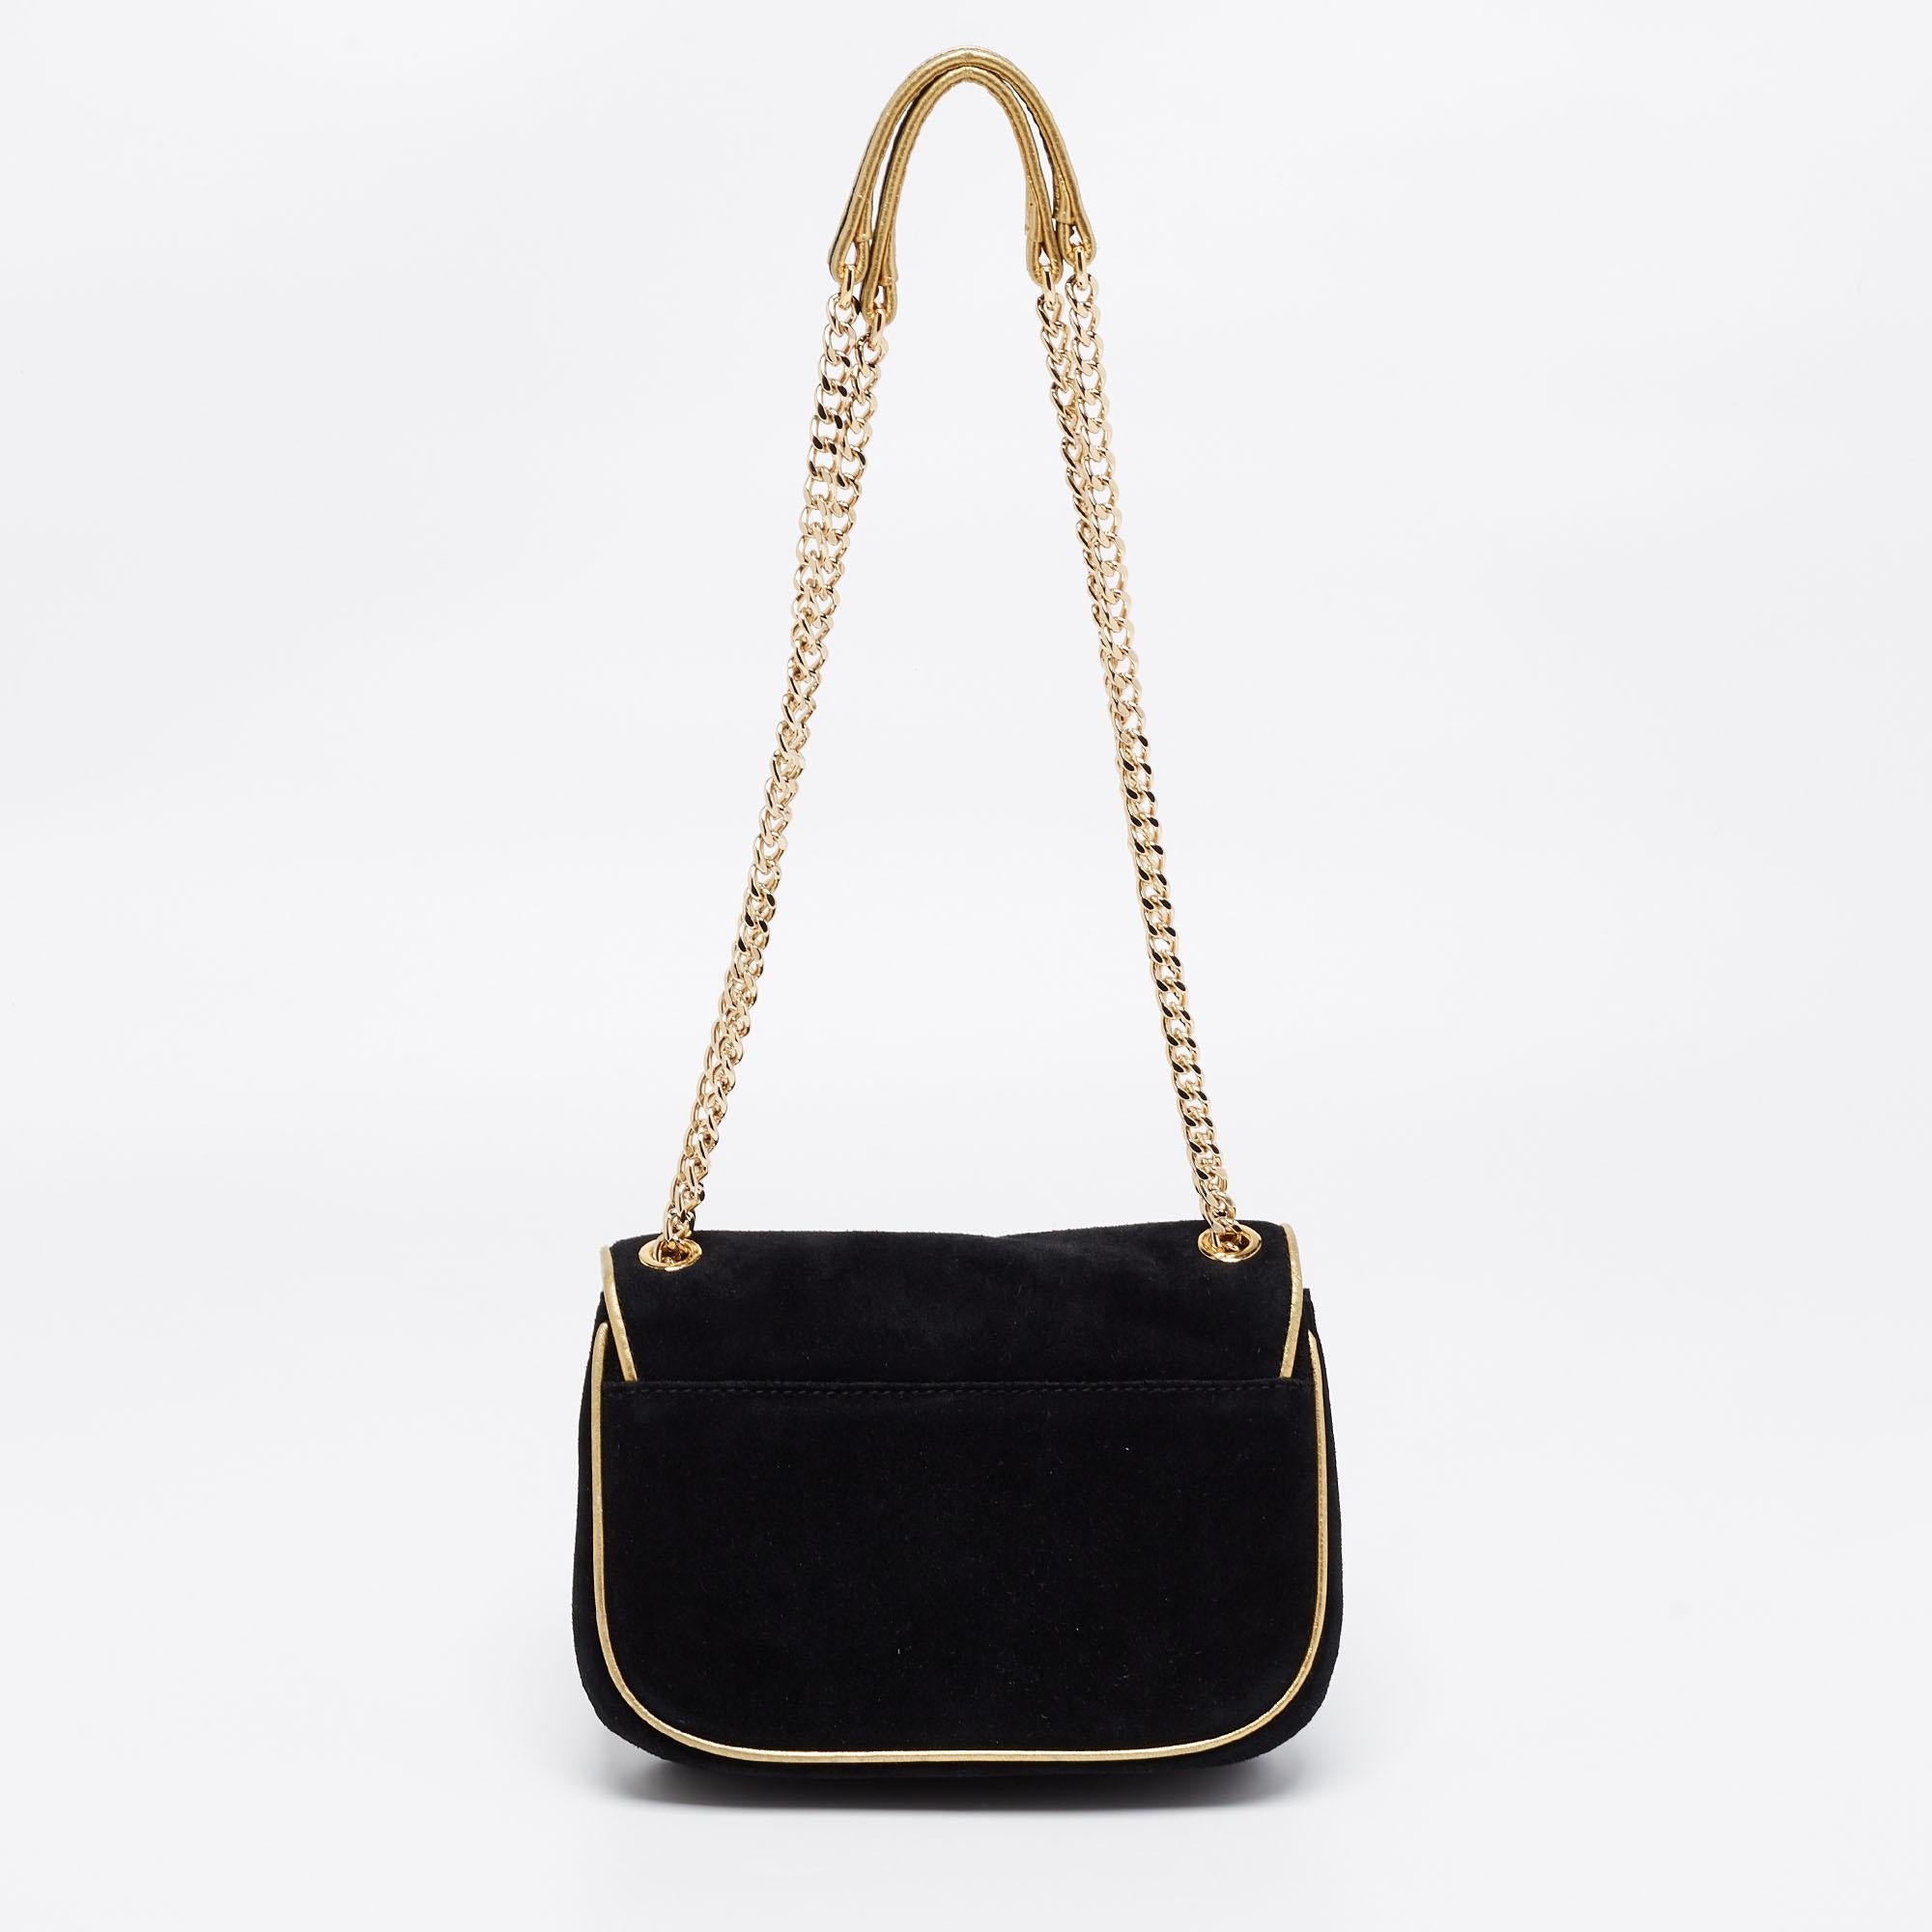 This Michael Kors bag will provide you with hands-free ease. Created from leather and suede, it flaunts a branded turn-lock on the front, dual chain-leather handles, and a nylon-lined interior. The black and gold shade of this bag makes it an